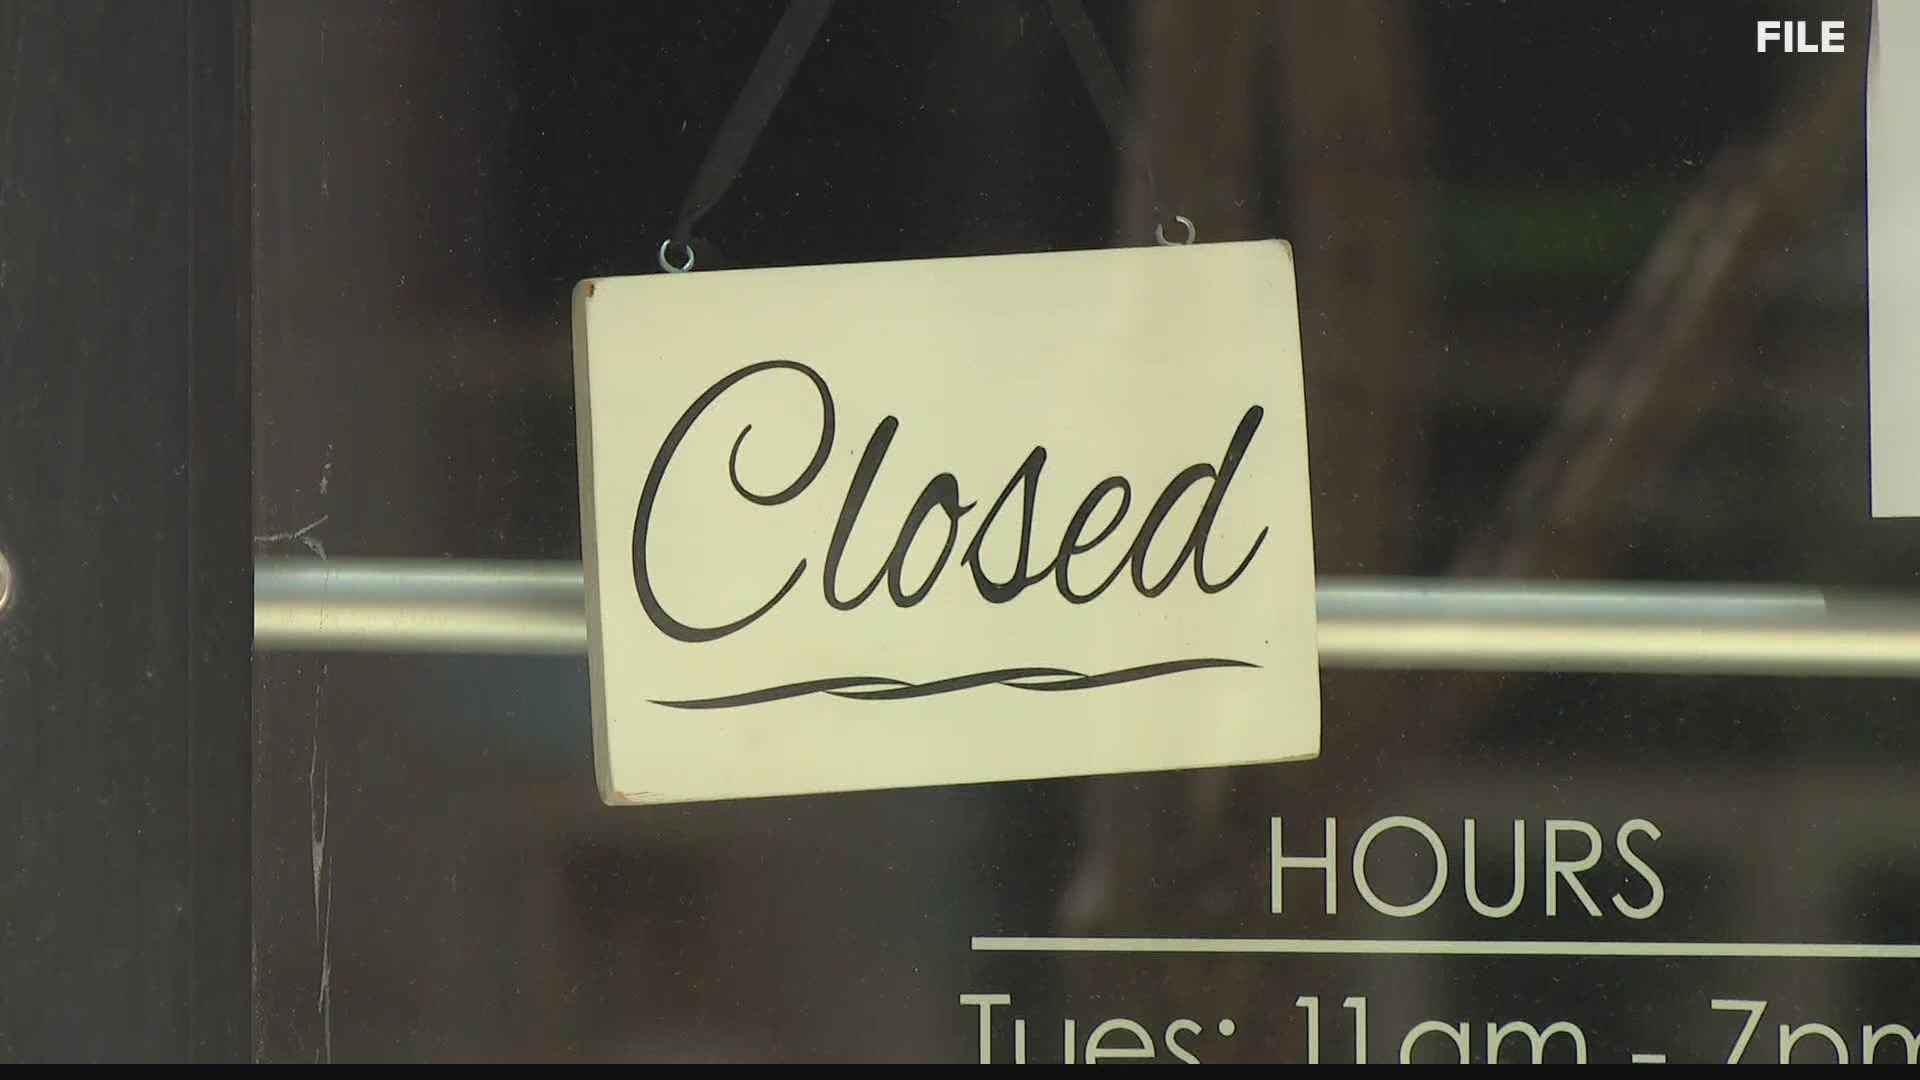 Some businesses, including restaurants, retail and offices will be allowed open on May 18, St. Louis Mayor Lyda Krewson announced during her briefing Friday.